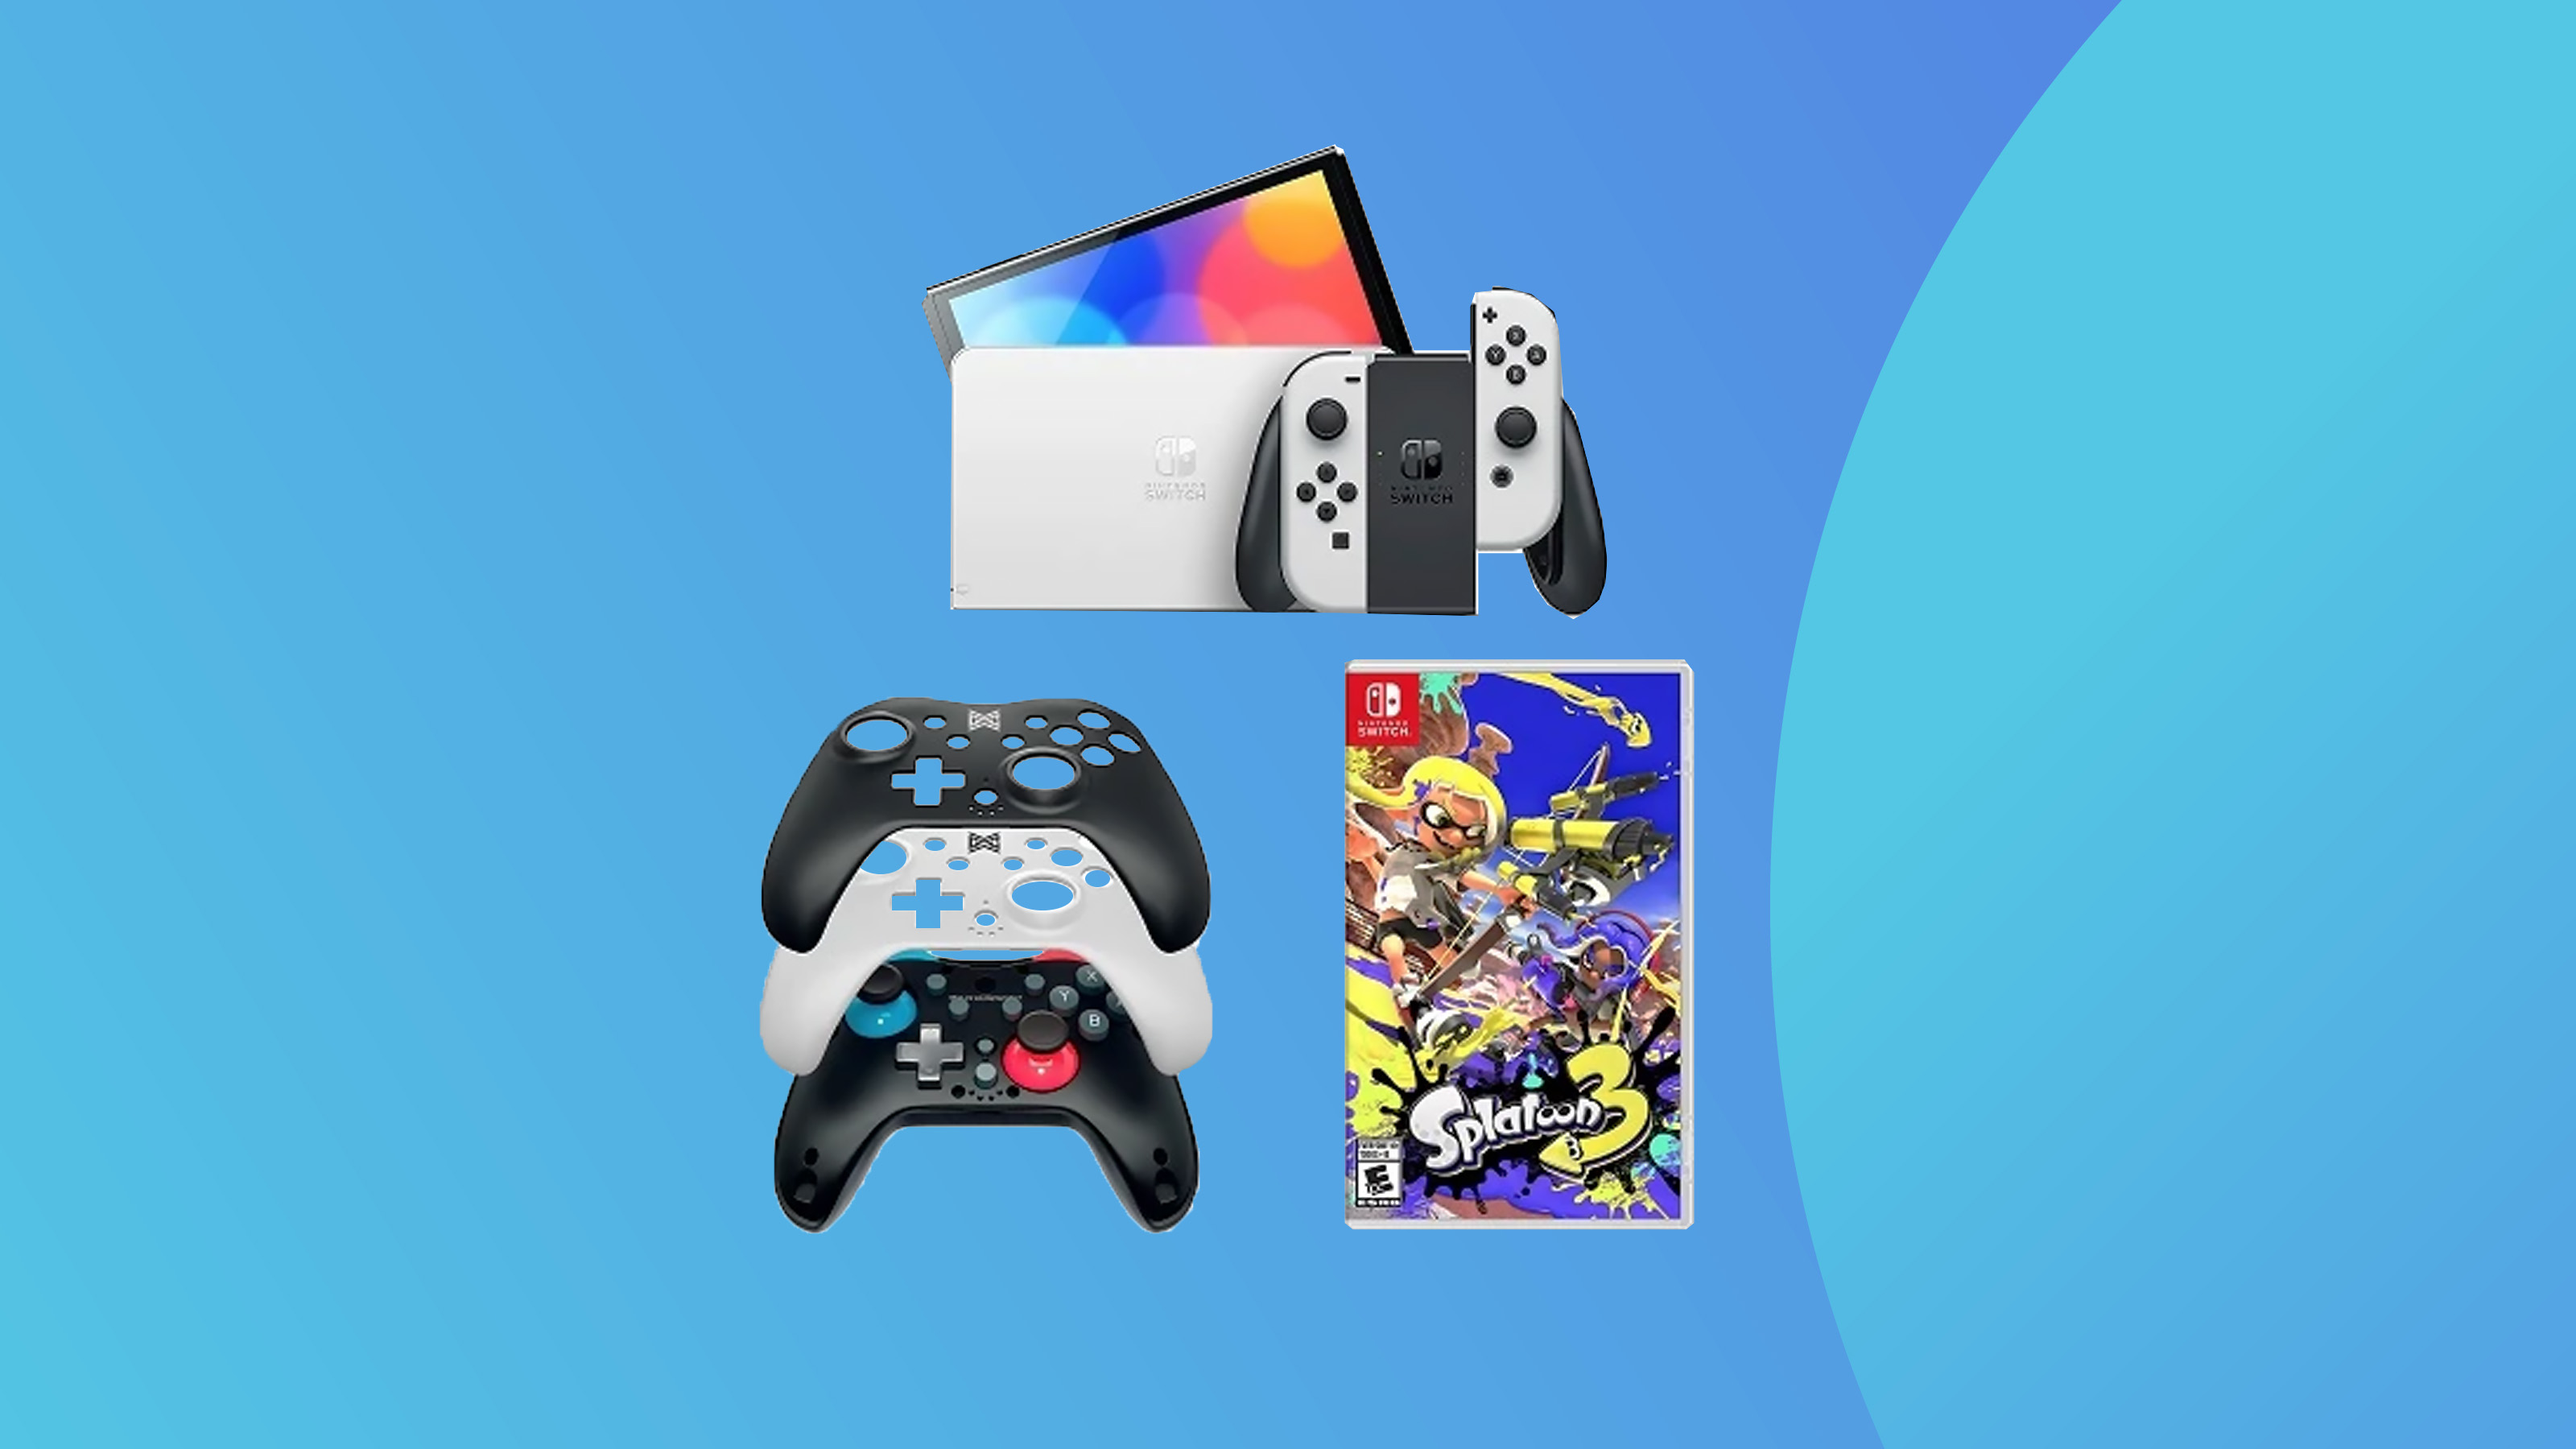 A product image of Switch Oled and accessories on a colorful background